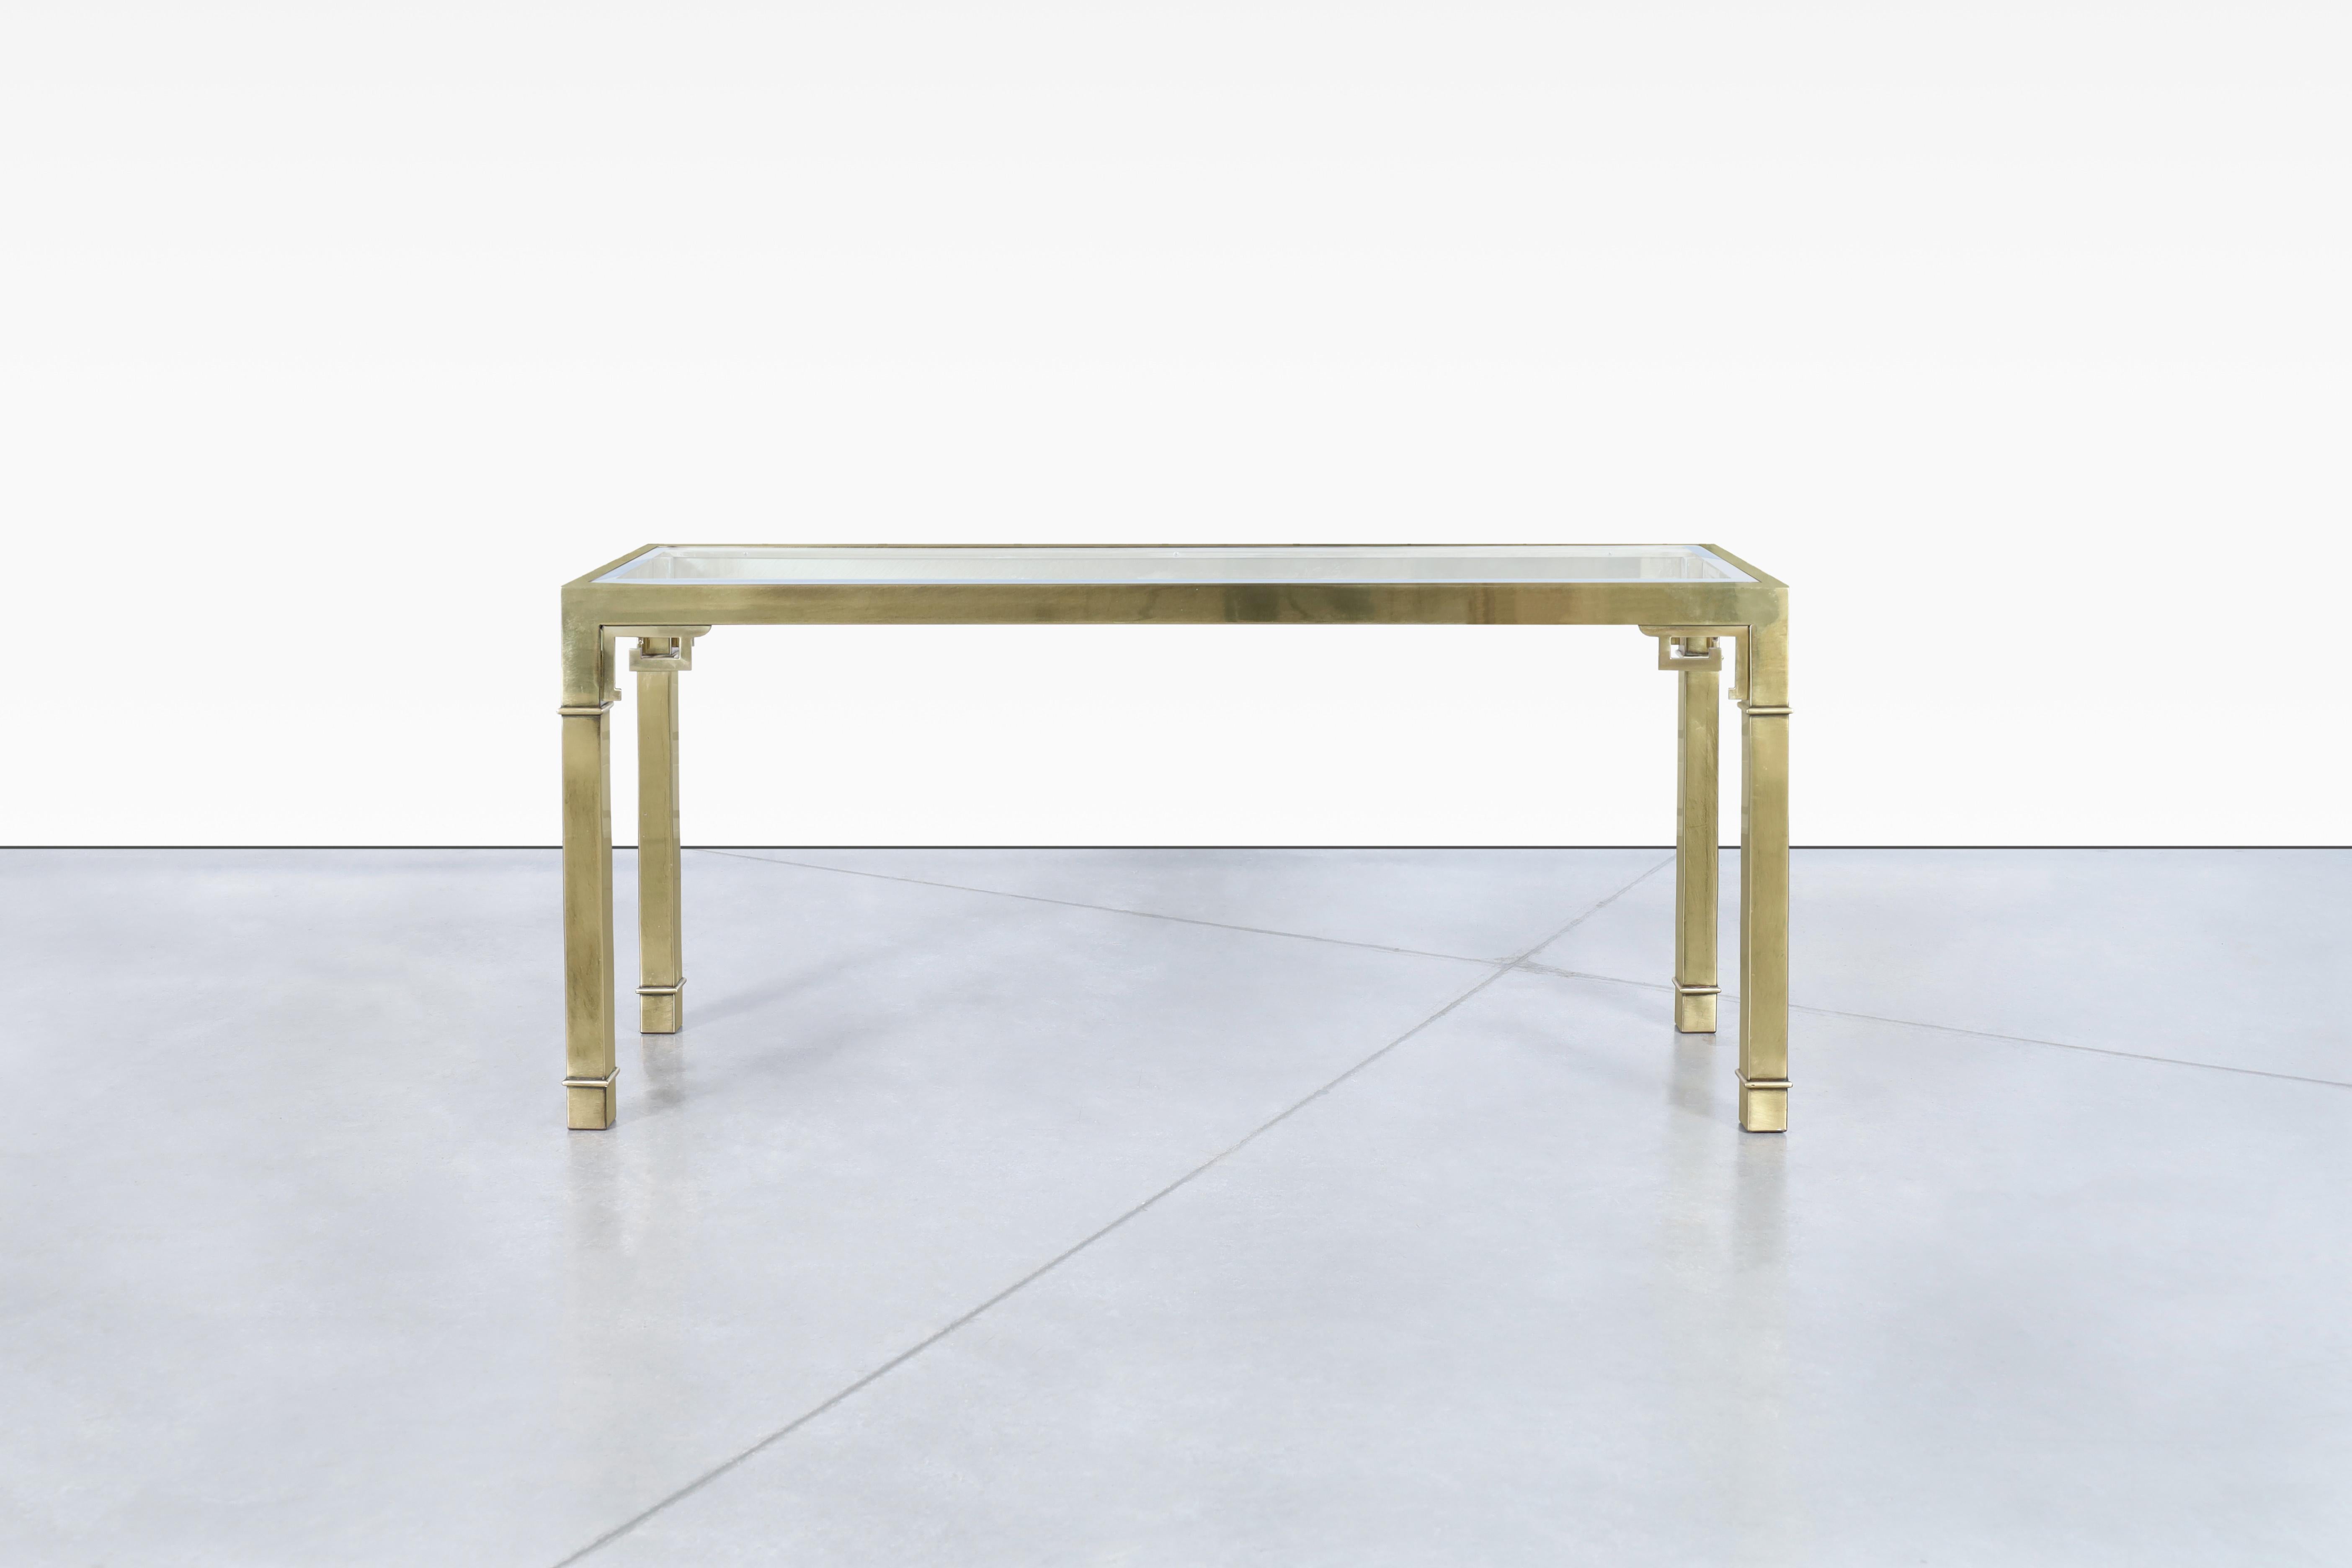 This vintage Hollywood Regency brass console table by Mastercraft is a true masterpiece of design. Crafted in the United States during the 1970s, this table features a patinated brass frame that exudes an air of elegance and sophistication. The